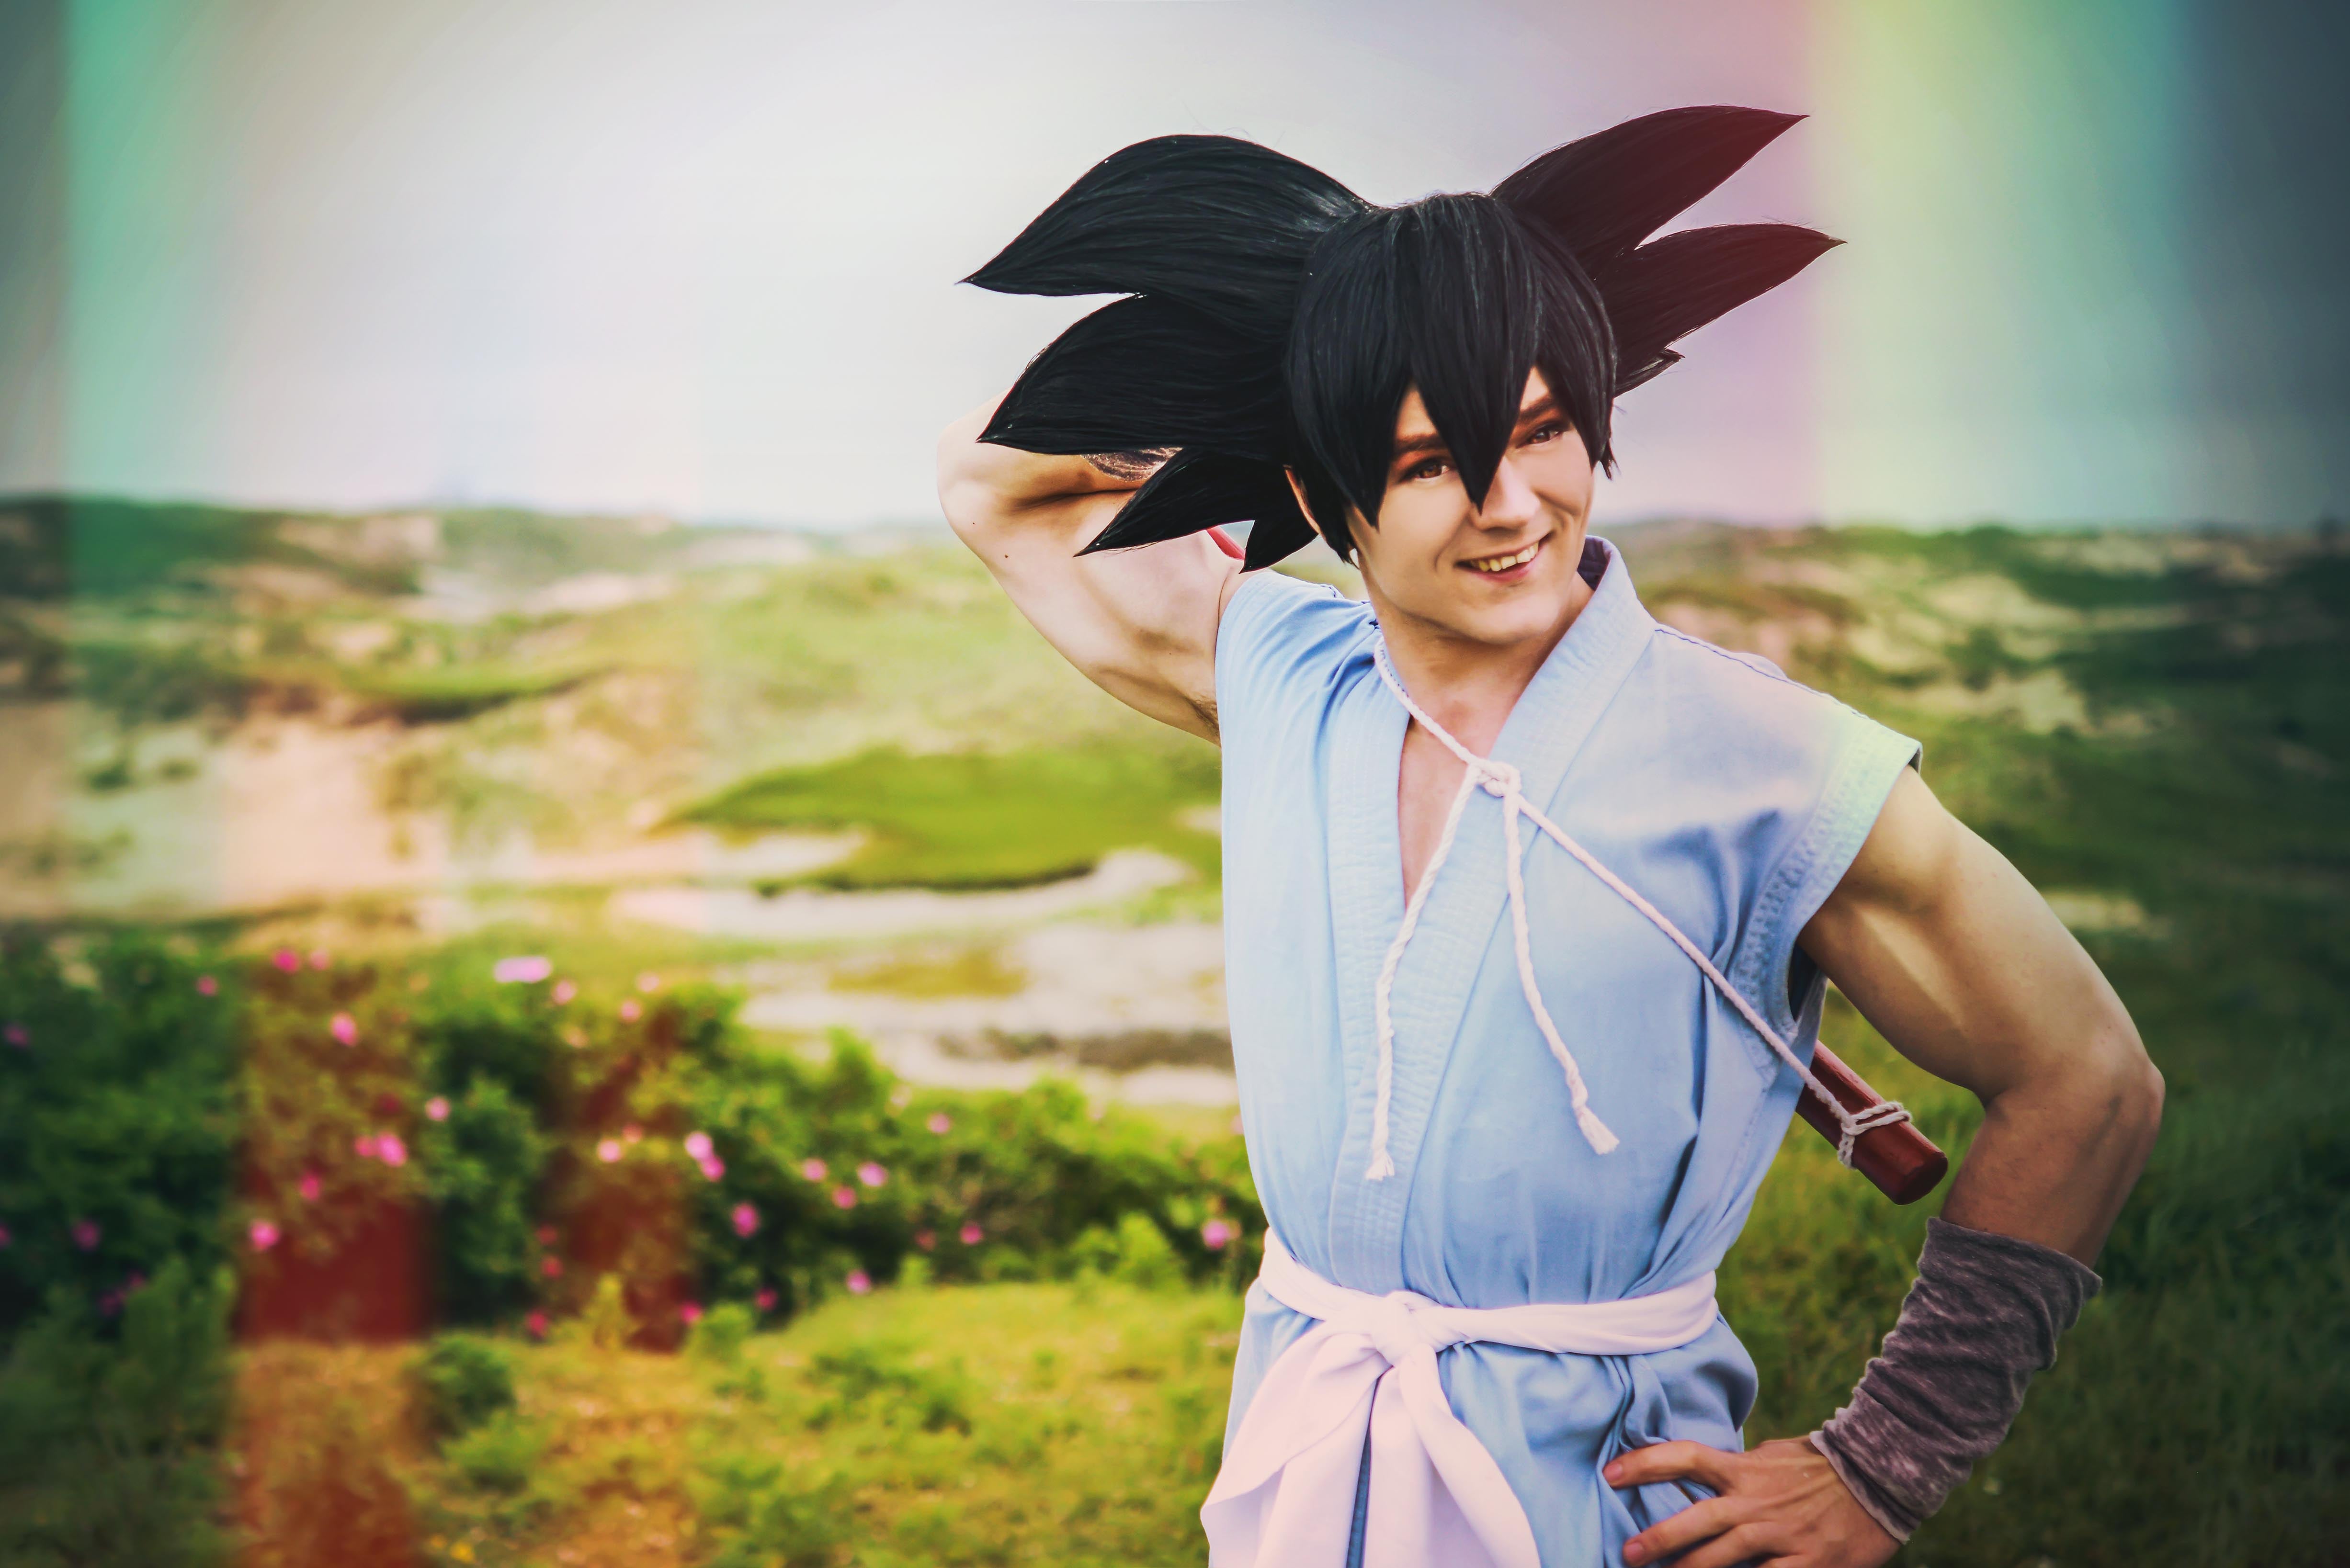 Son Goku cosplay from dragonball GT going on a walk to do his cardio